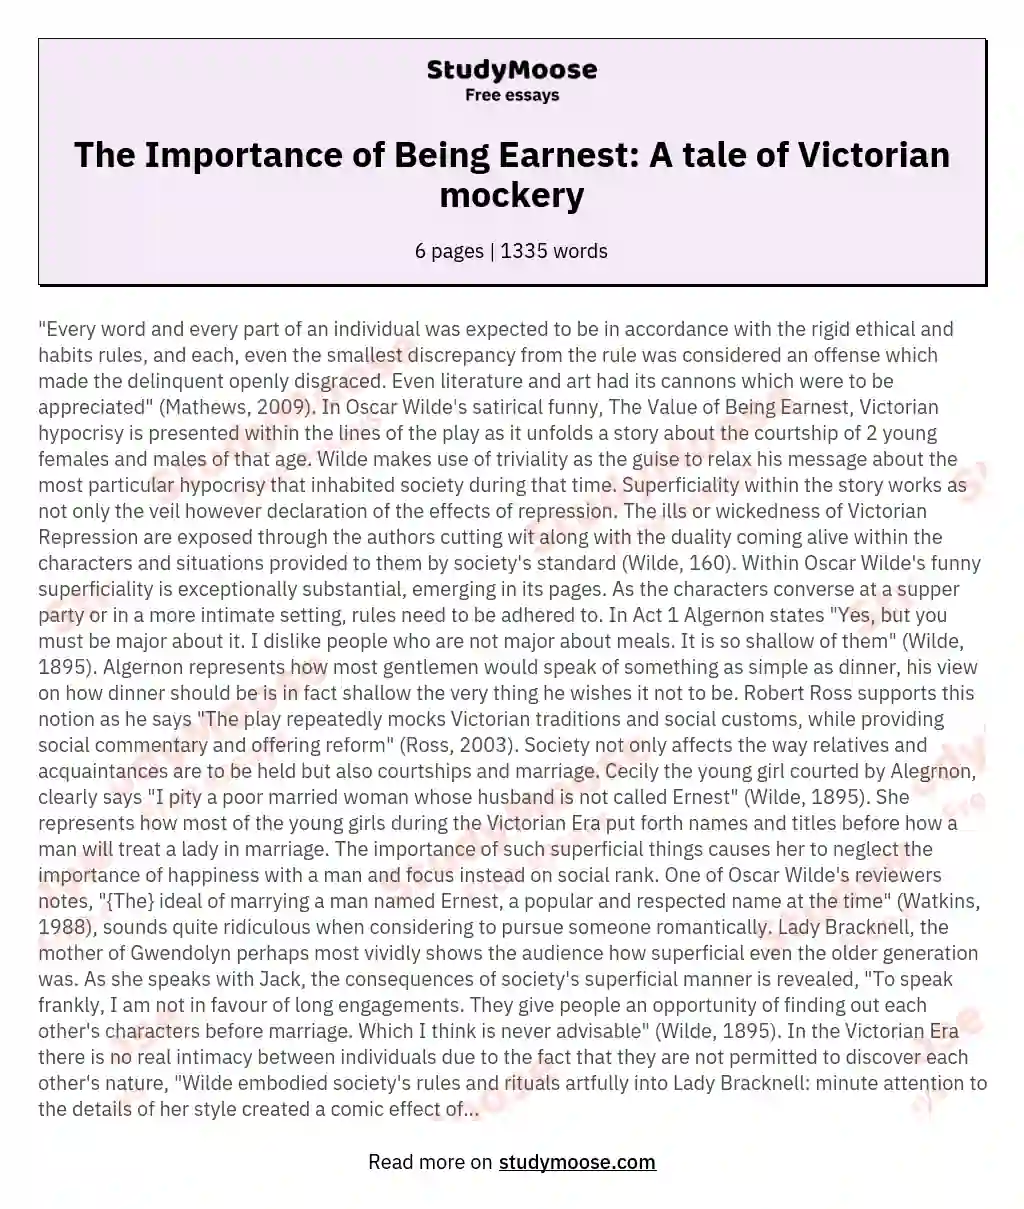 The Importance of Being Earnest: A tale of Victorian mockery